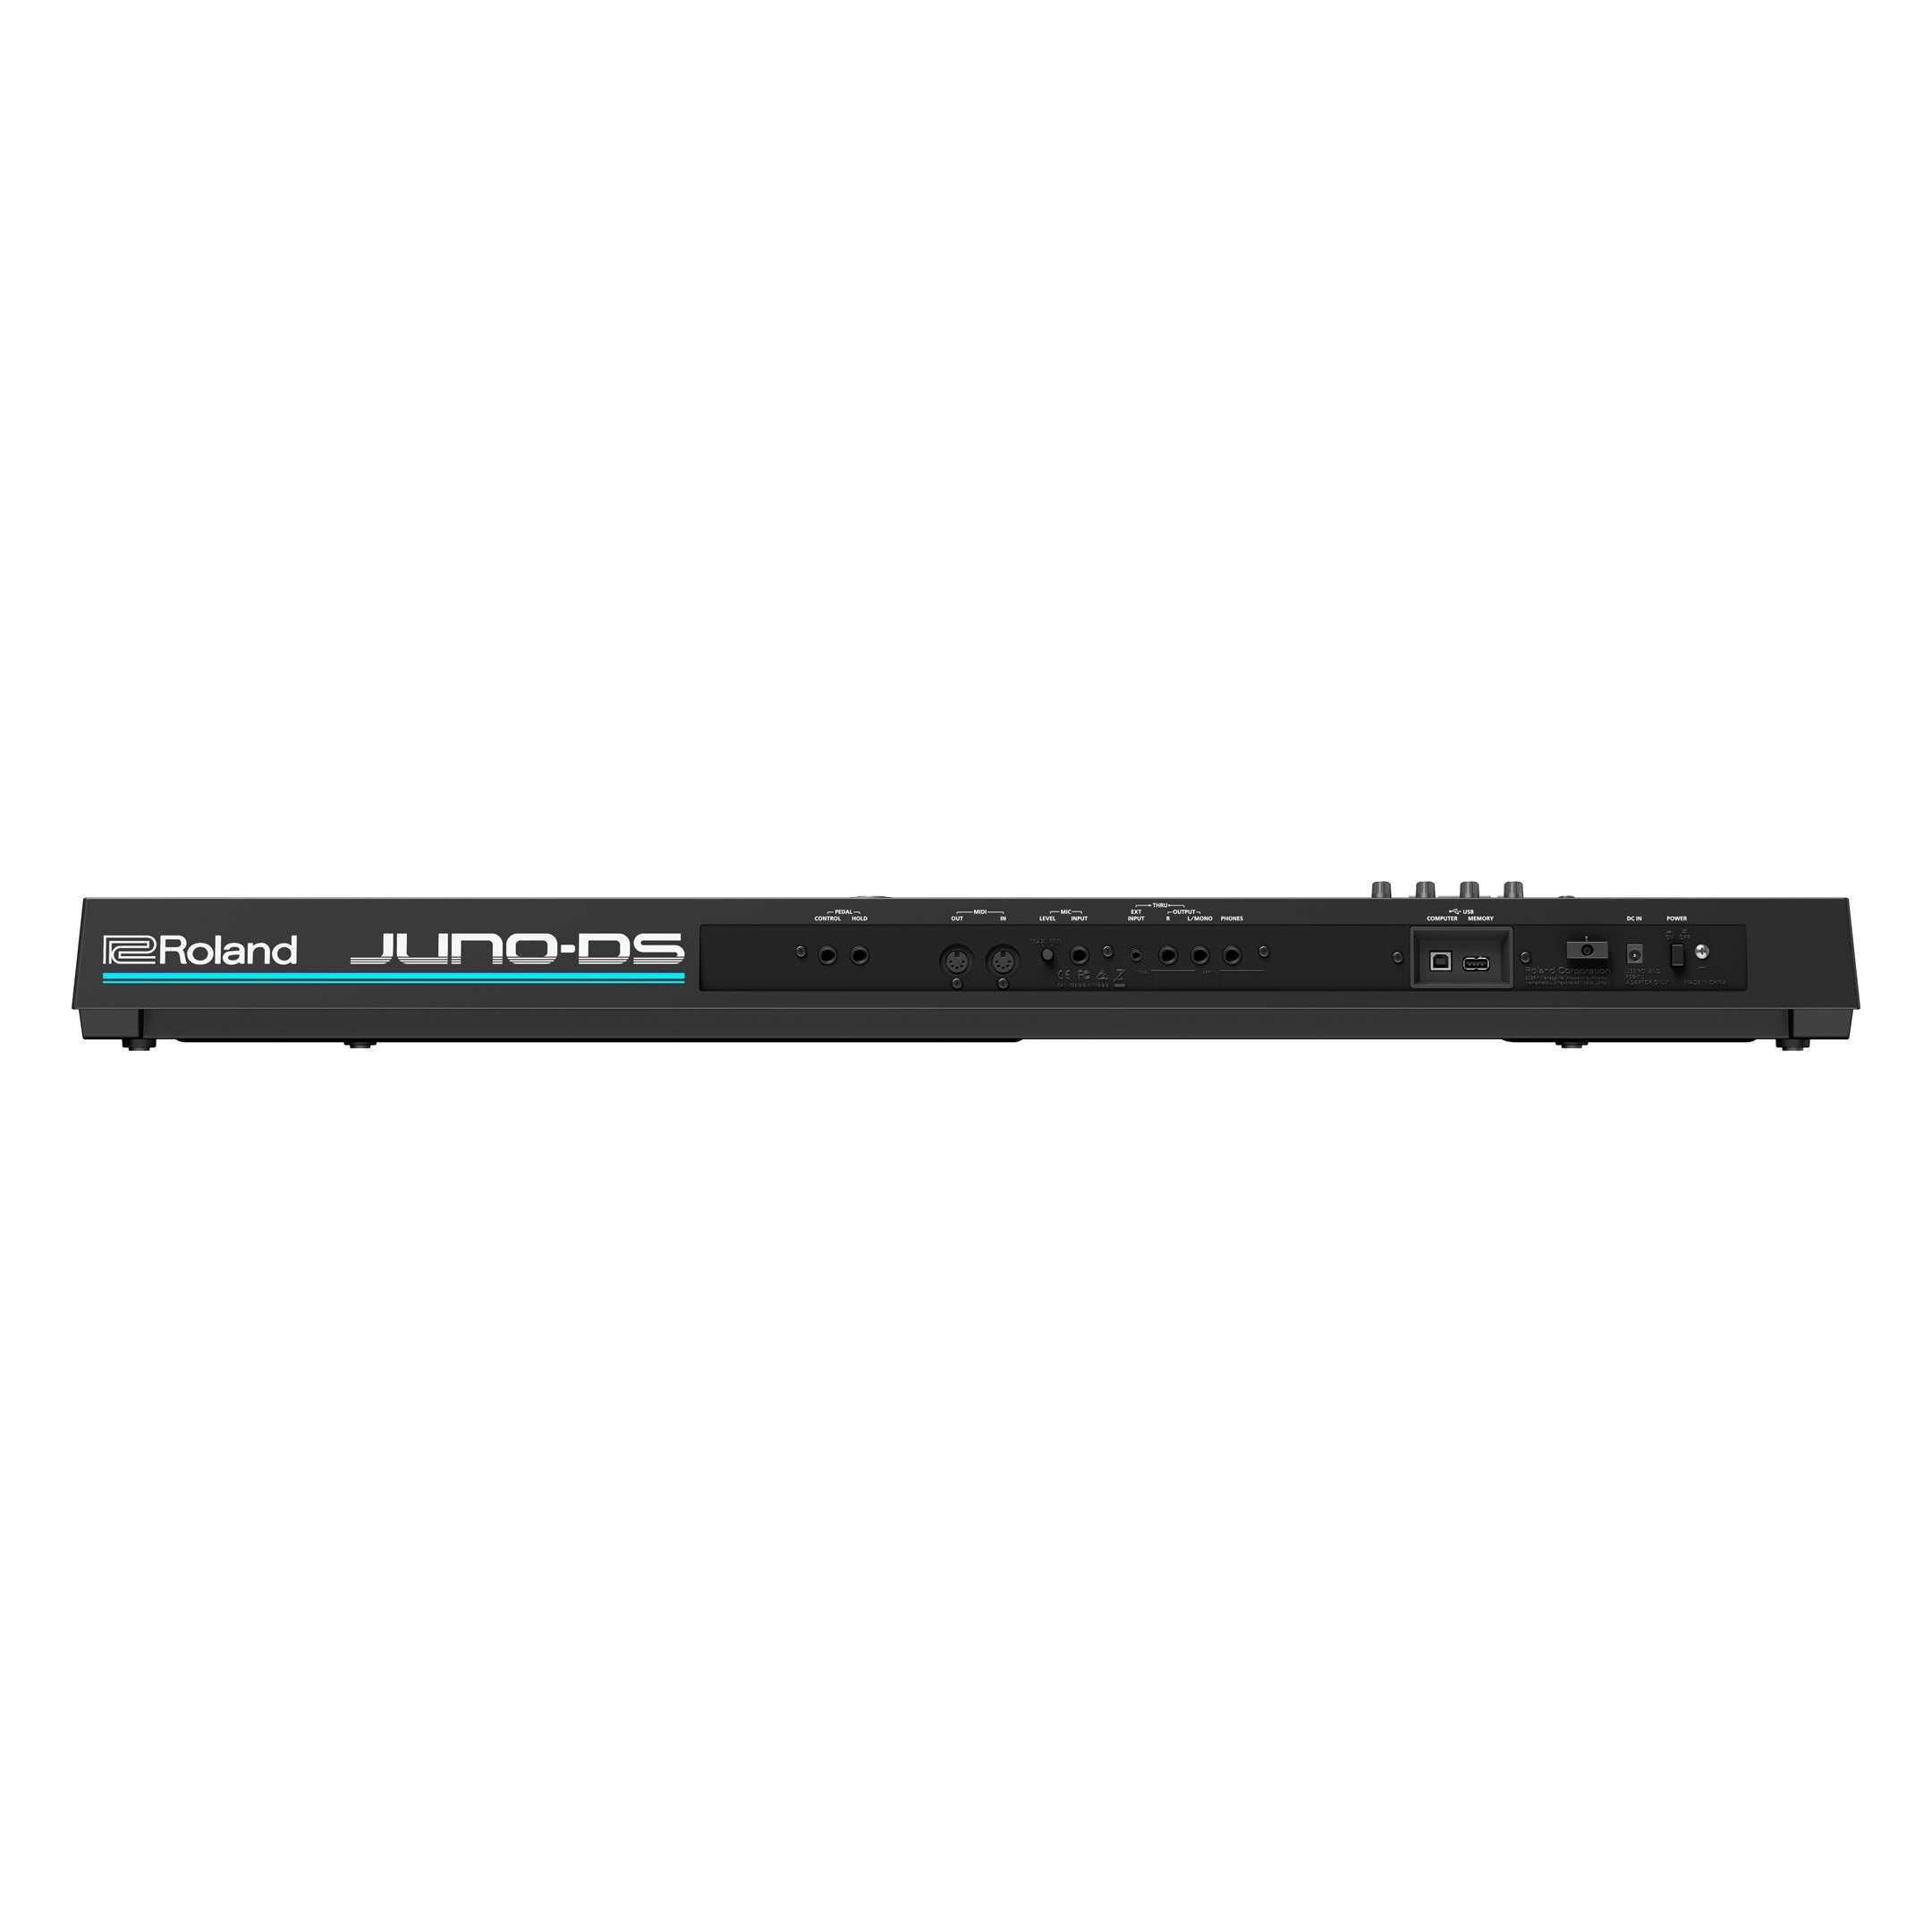 Roland JUNO-DS61 Synthesizer, 61-note, in Black – Carlton Music Center